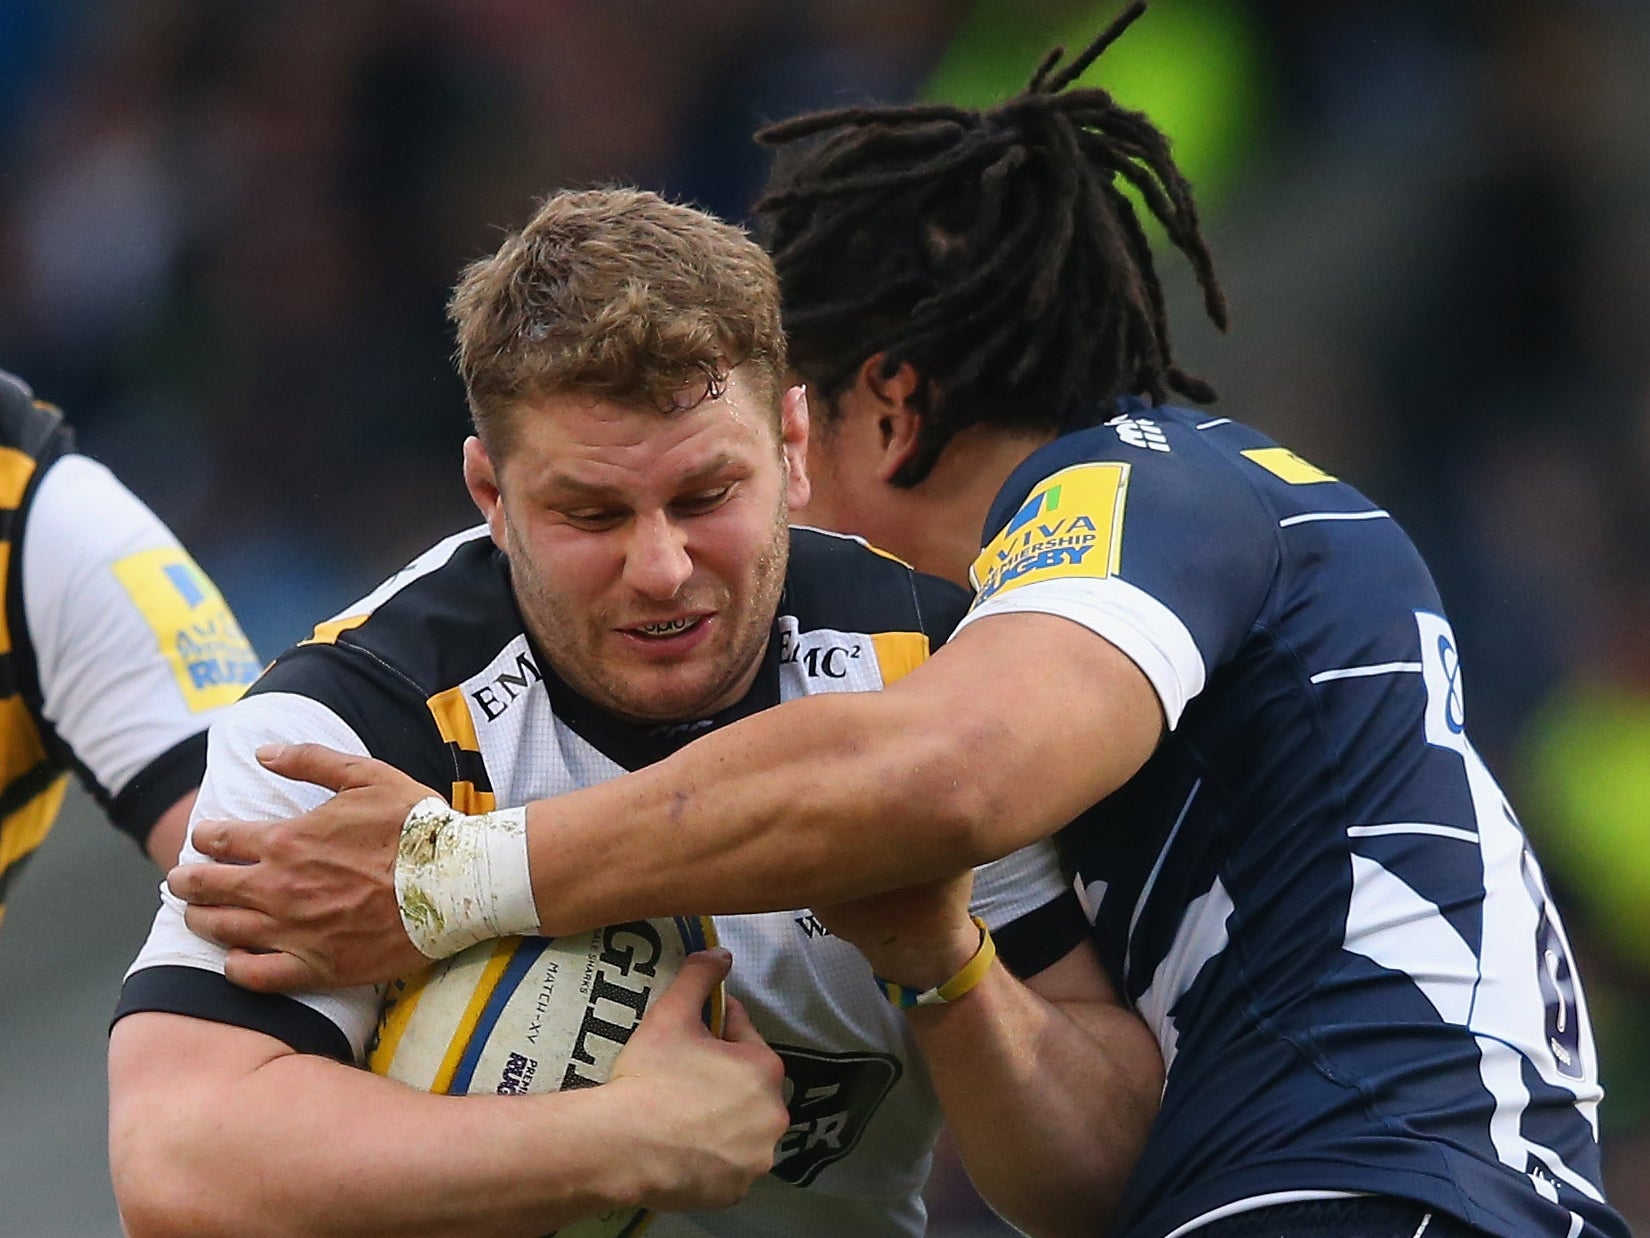 Thomas Young of Wasps is tackled by TJ Ioane